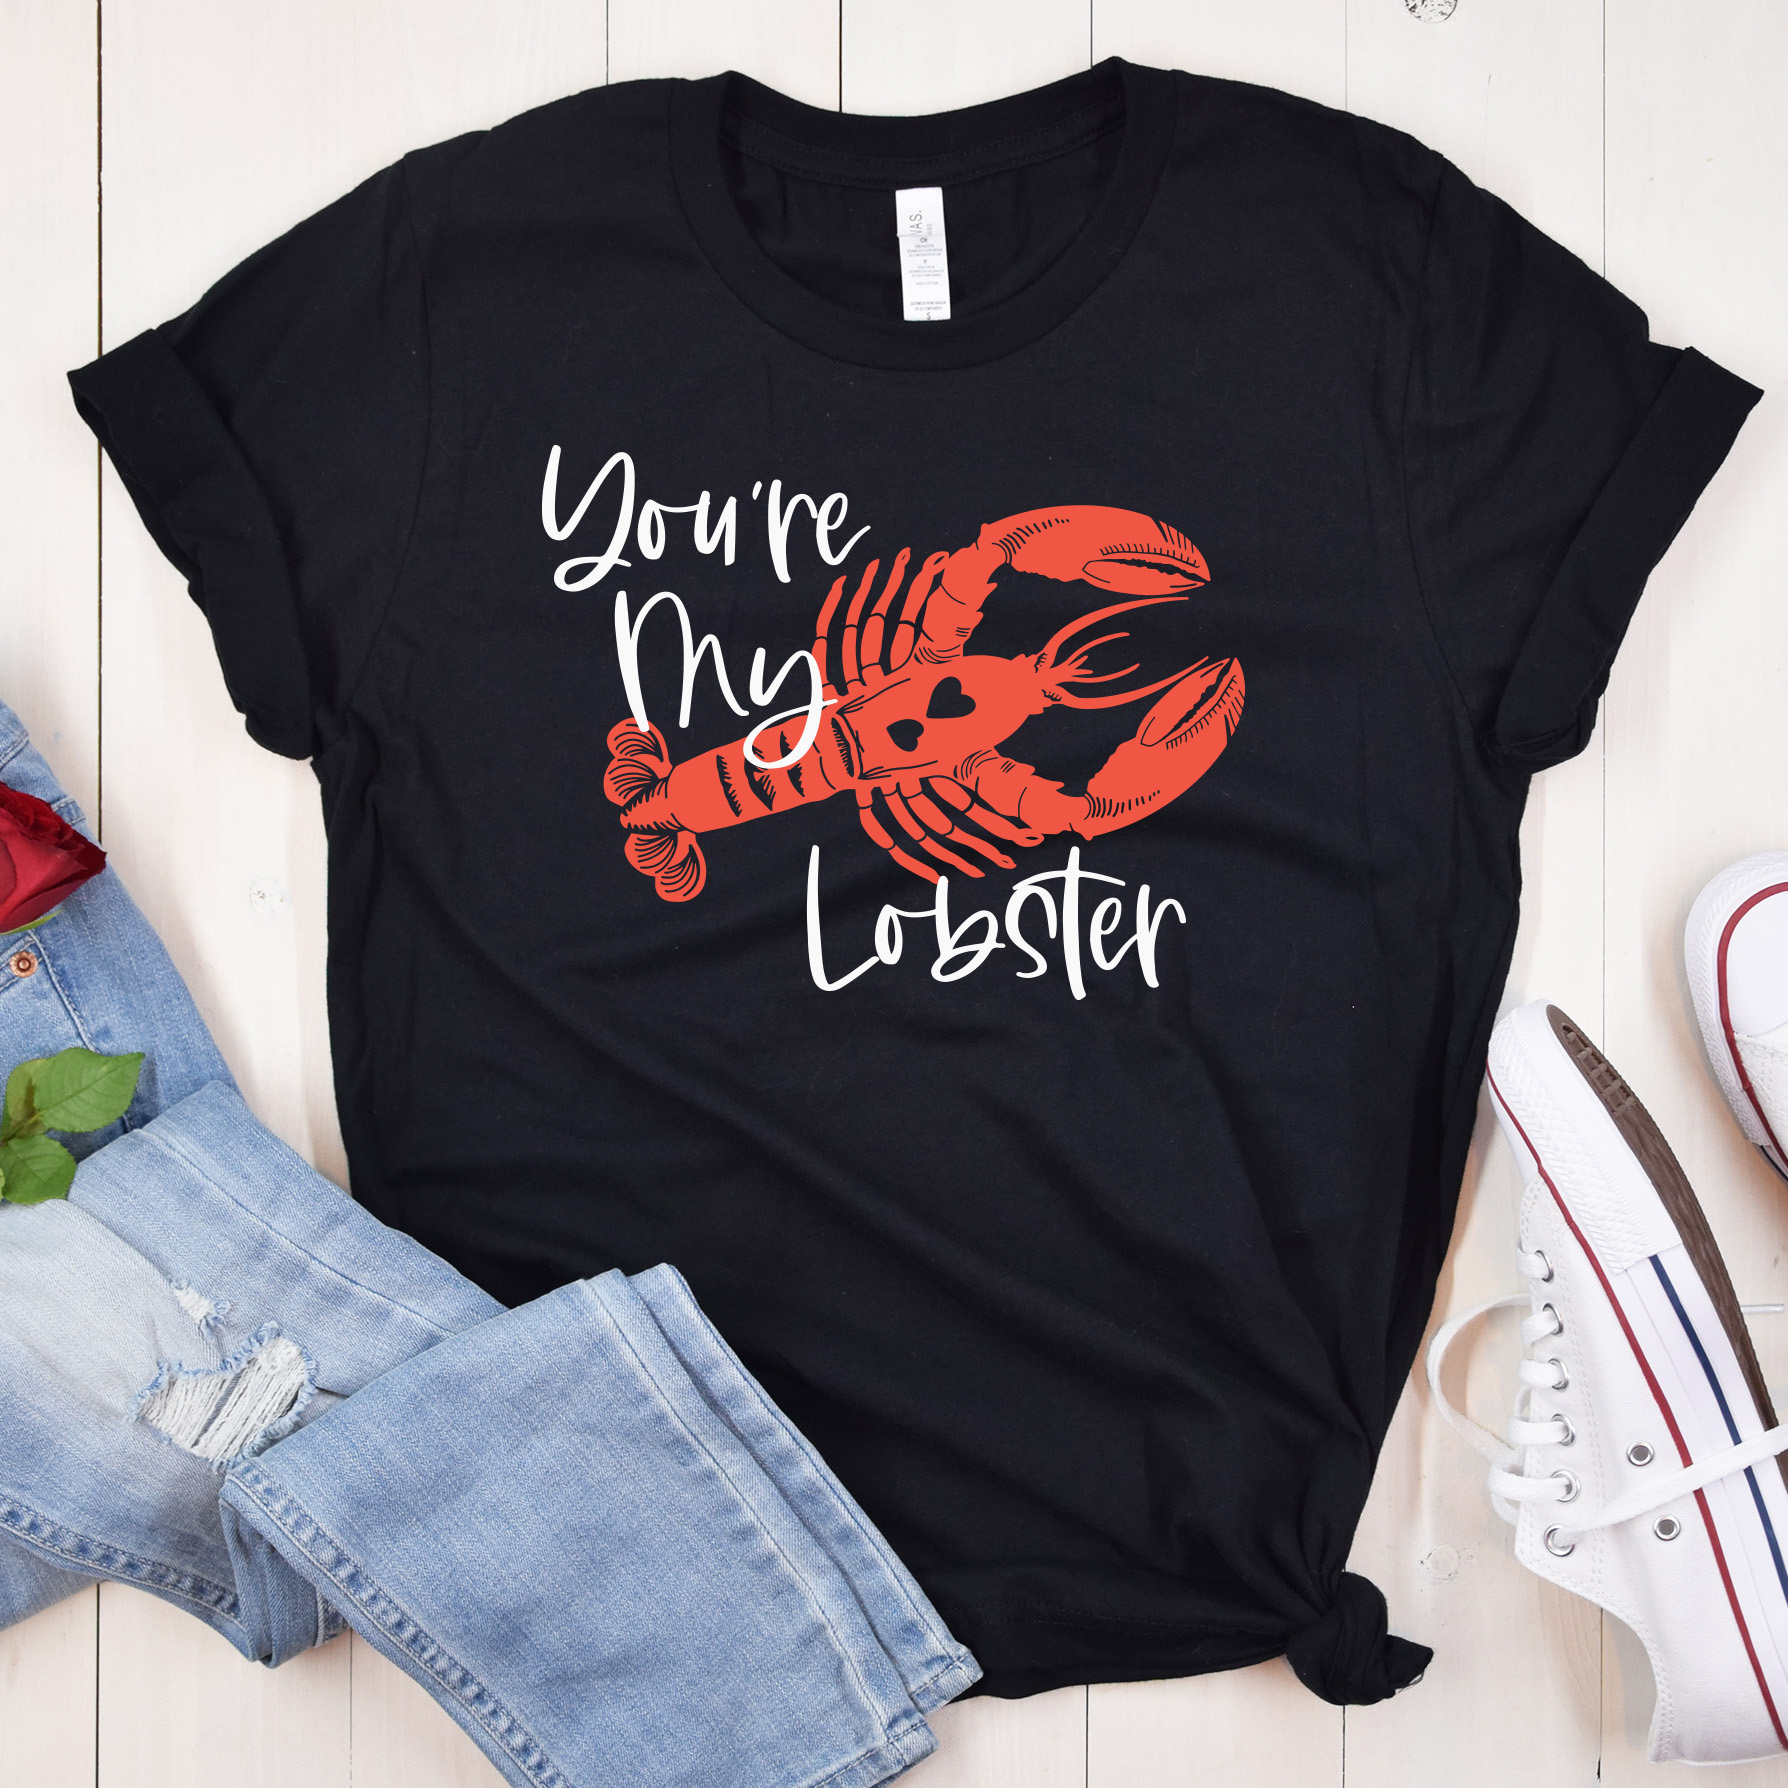 black shirt on a wood background with a design of a lobster. Above it is the text You're My Lobster.